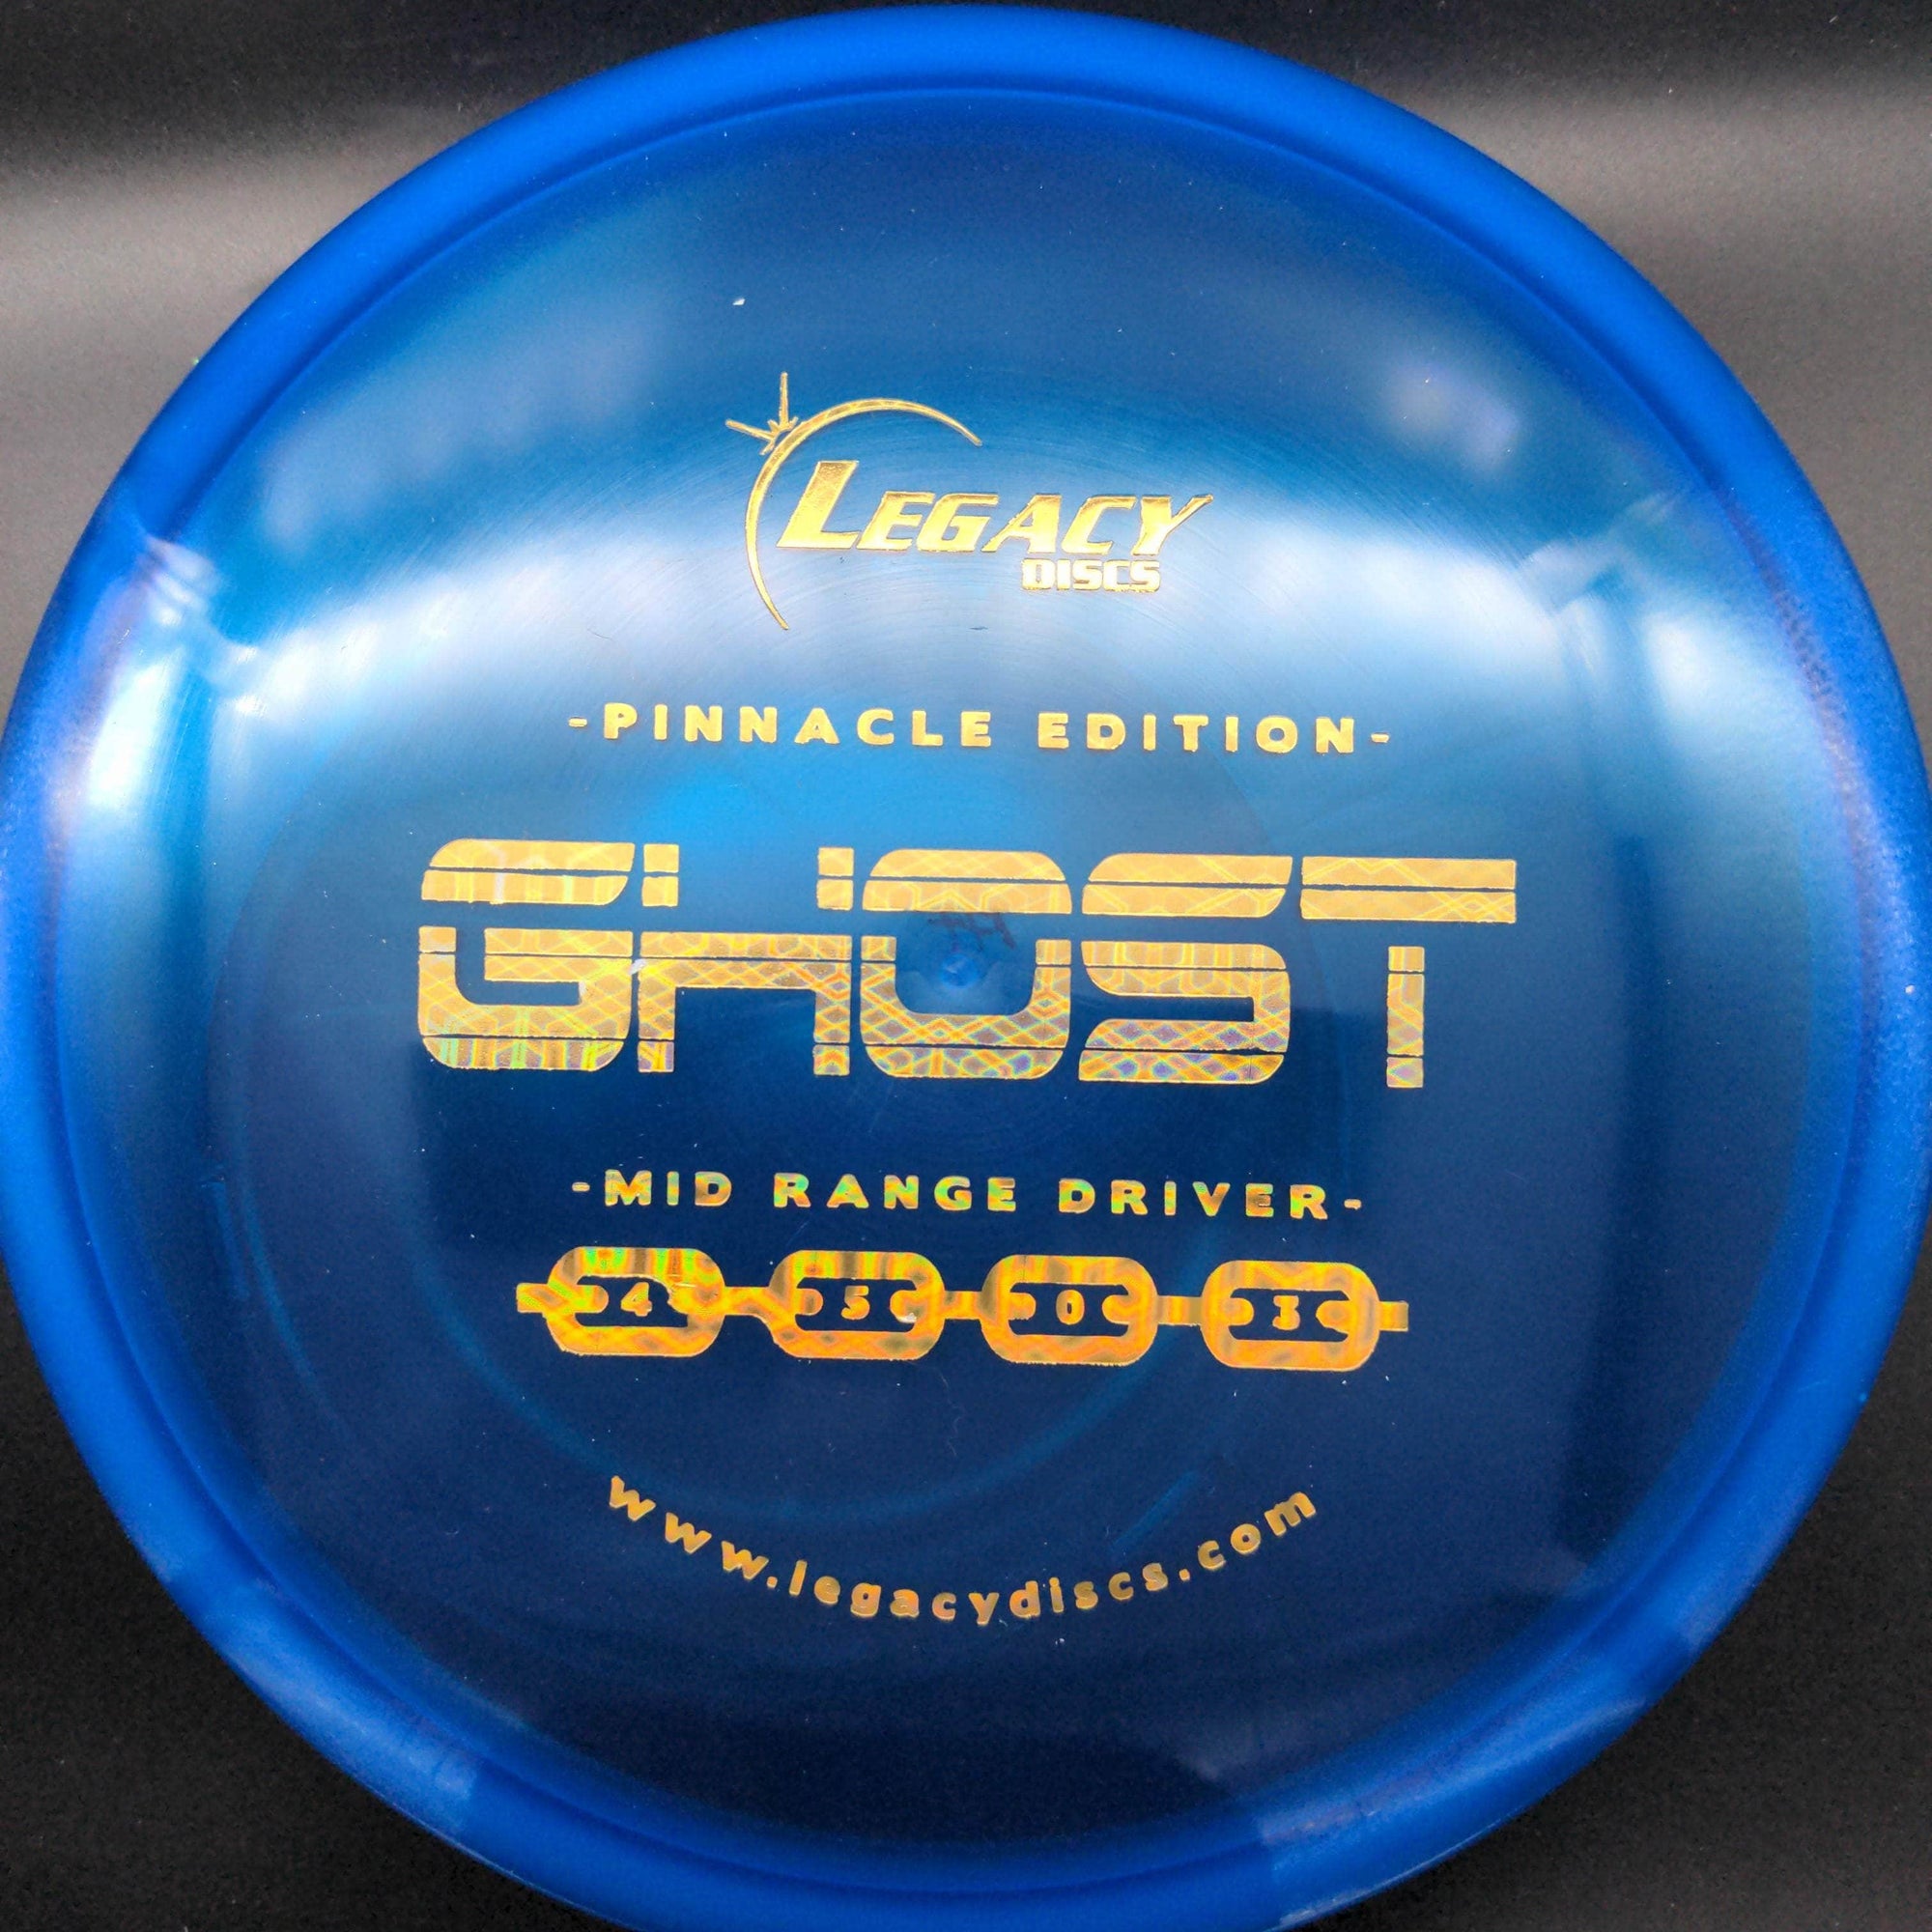 Legacy Fairway Driver Blue Yellow Tron Stamp 177g Ghost, Pinnacle Plastic